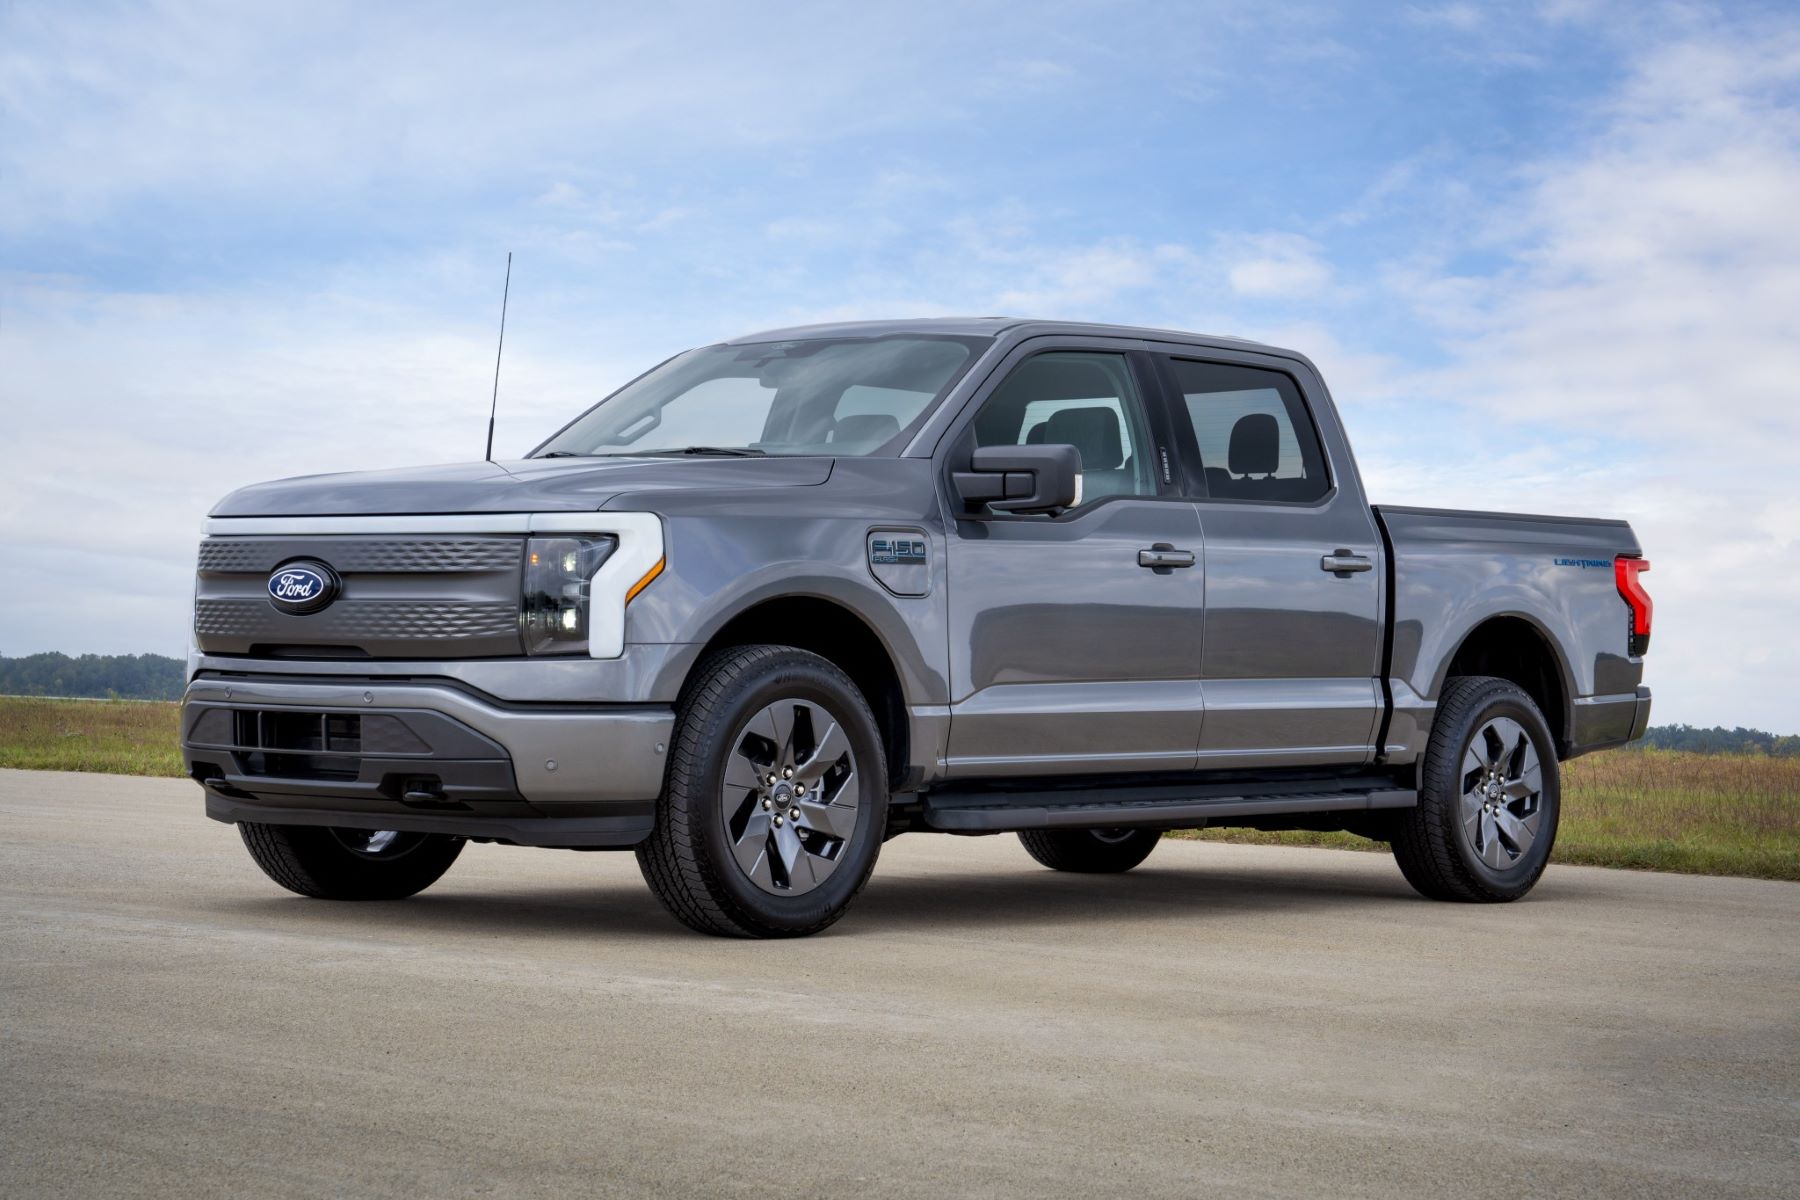 Ford Introduces New F-150 Lightning Flash With Enhanced Tech And Extended Battery Range